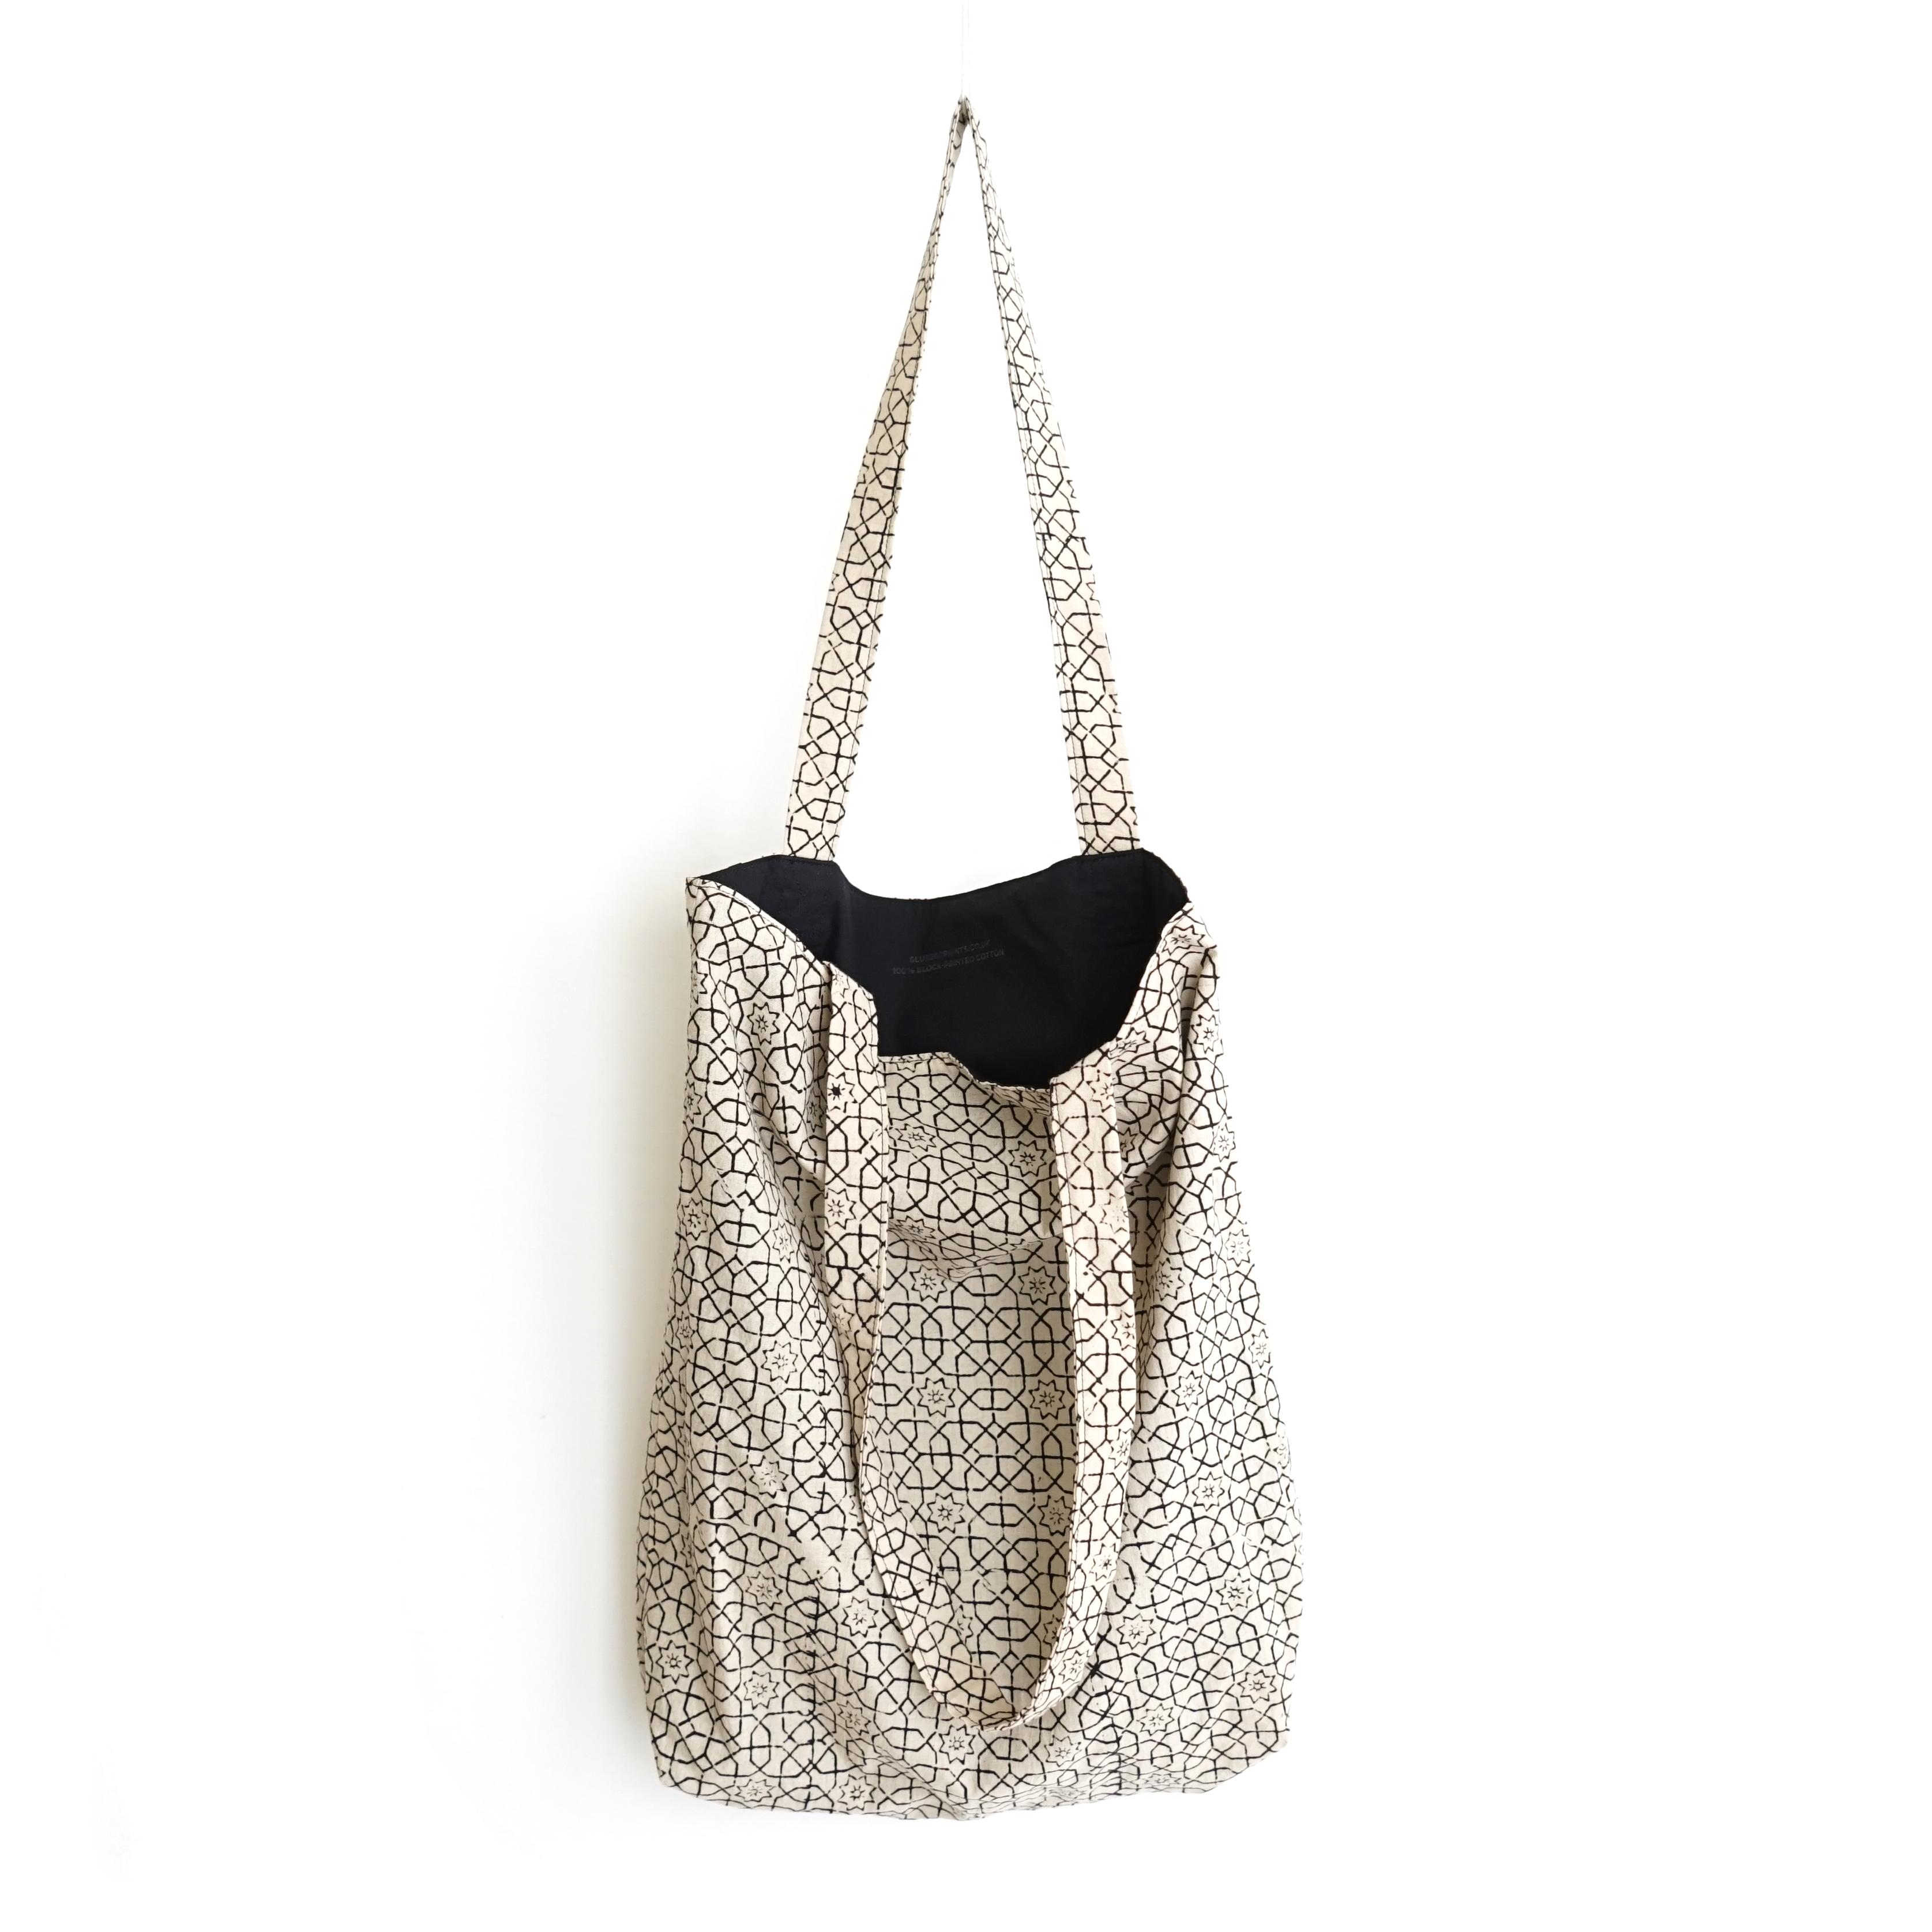 block printed cotton tote bag, natural dye, beige, black octagon design, lined with black cotton, closed